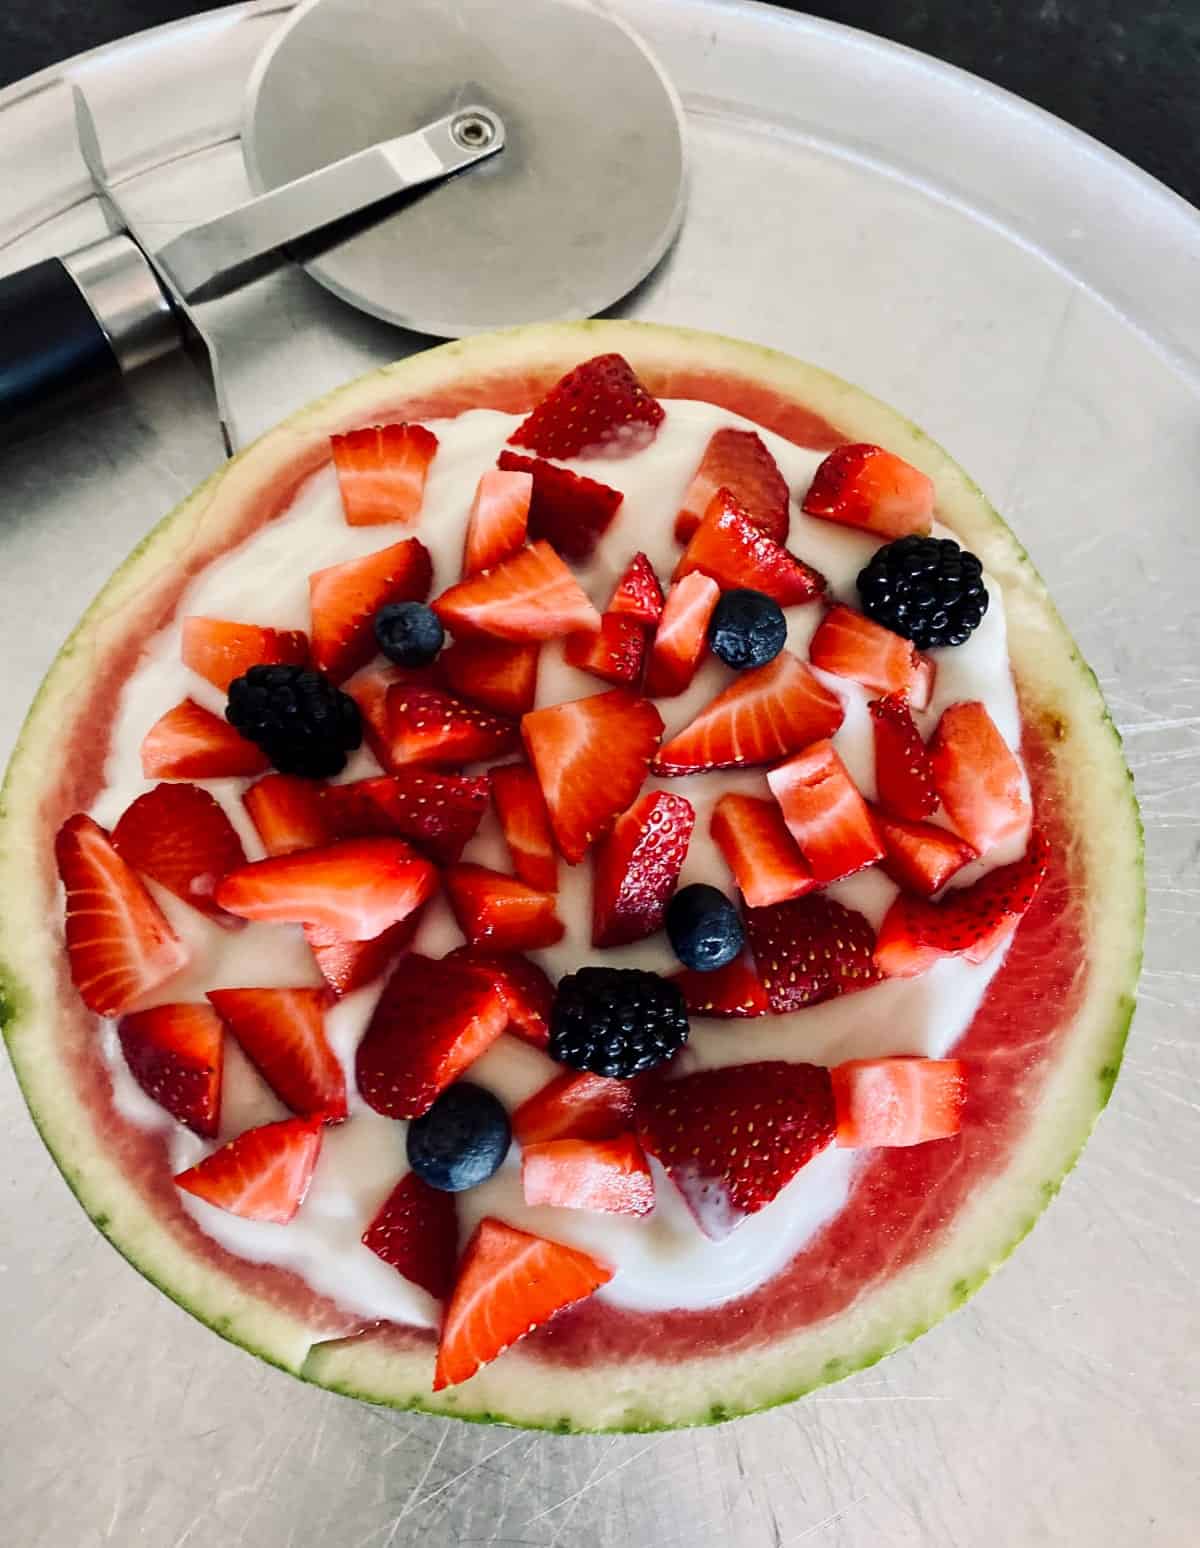 Watermelon pizza topped with yogurt, strawberries, blueberries and blackberries with pizza cutter.